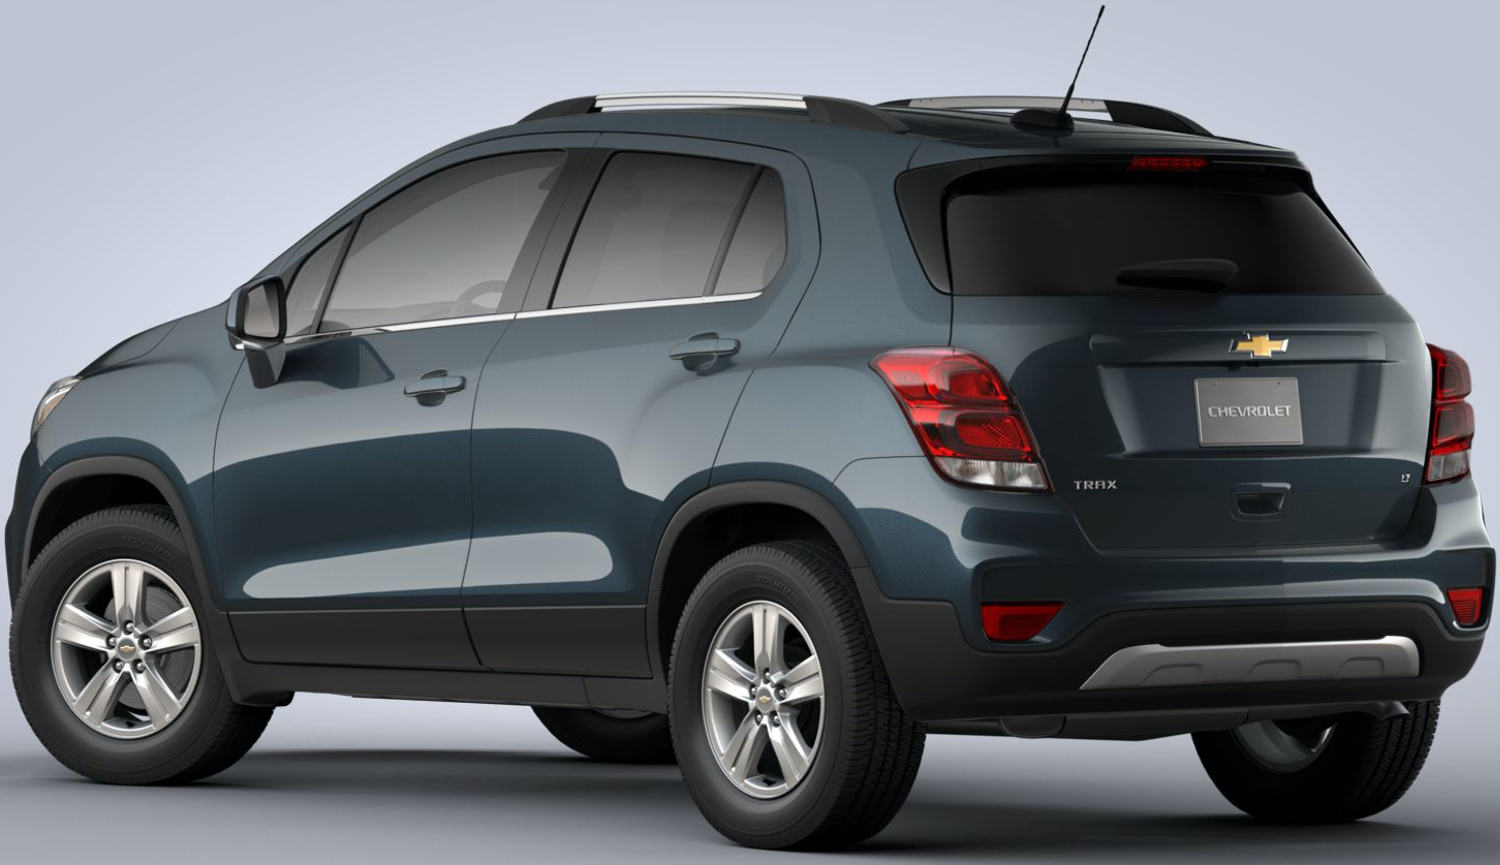 2021 Chevy Trax Gets New Shadow Gray Color: First Look